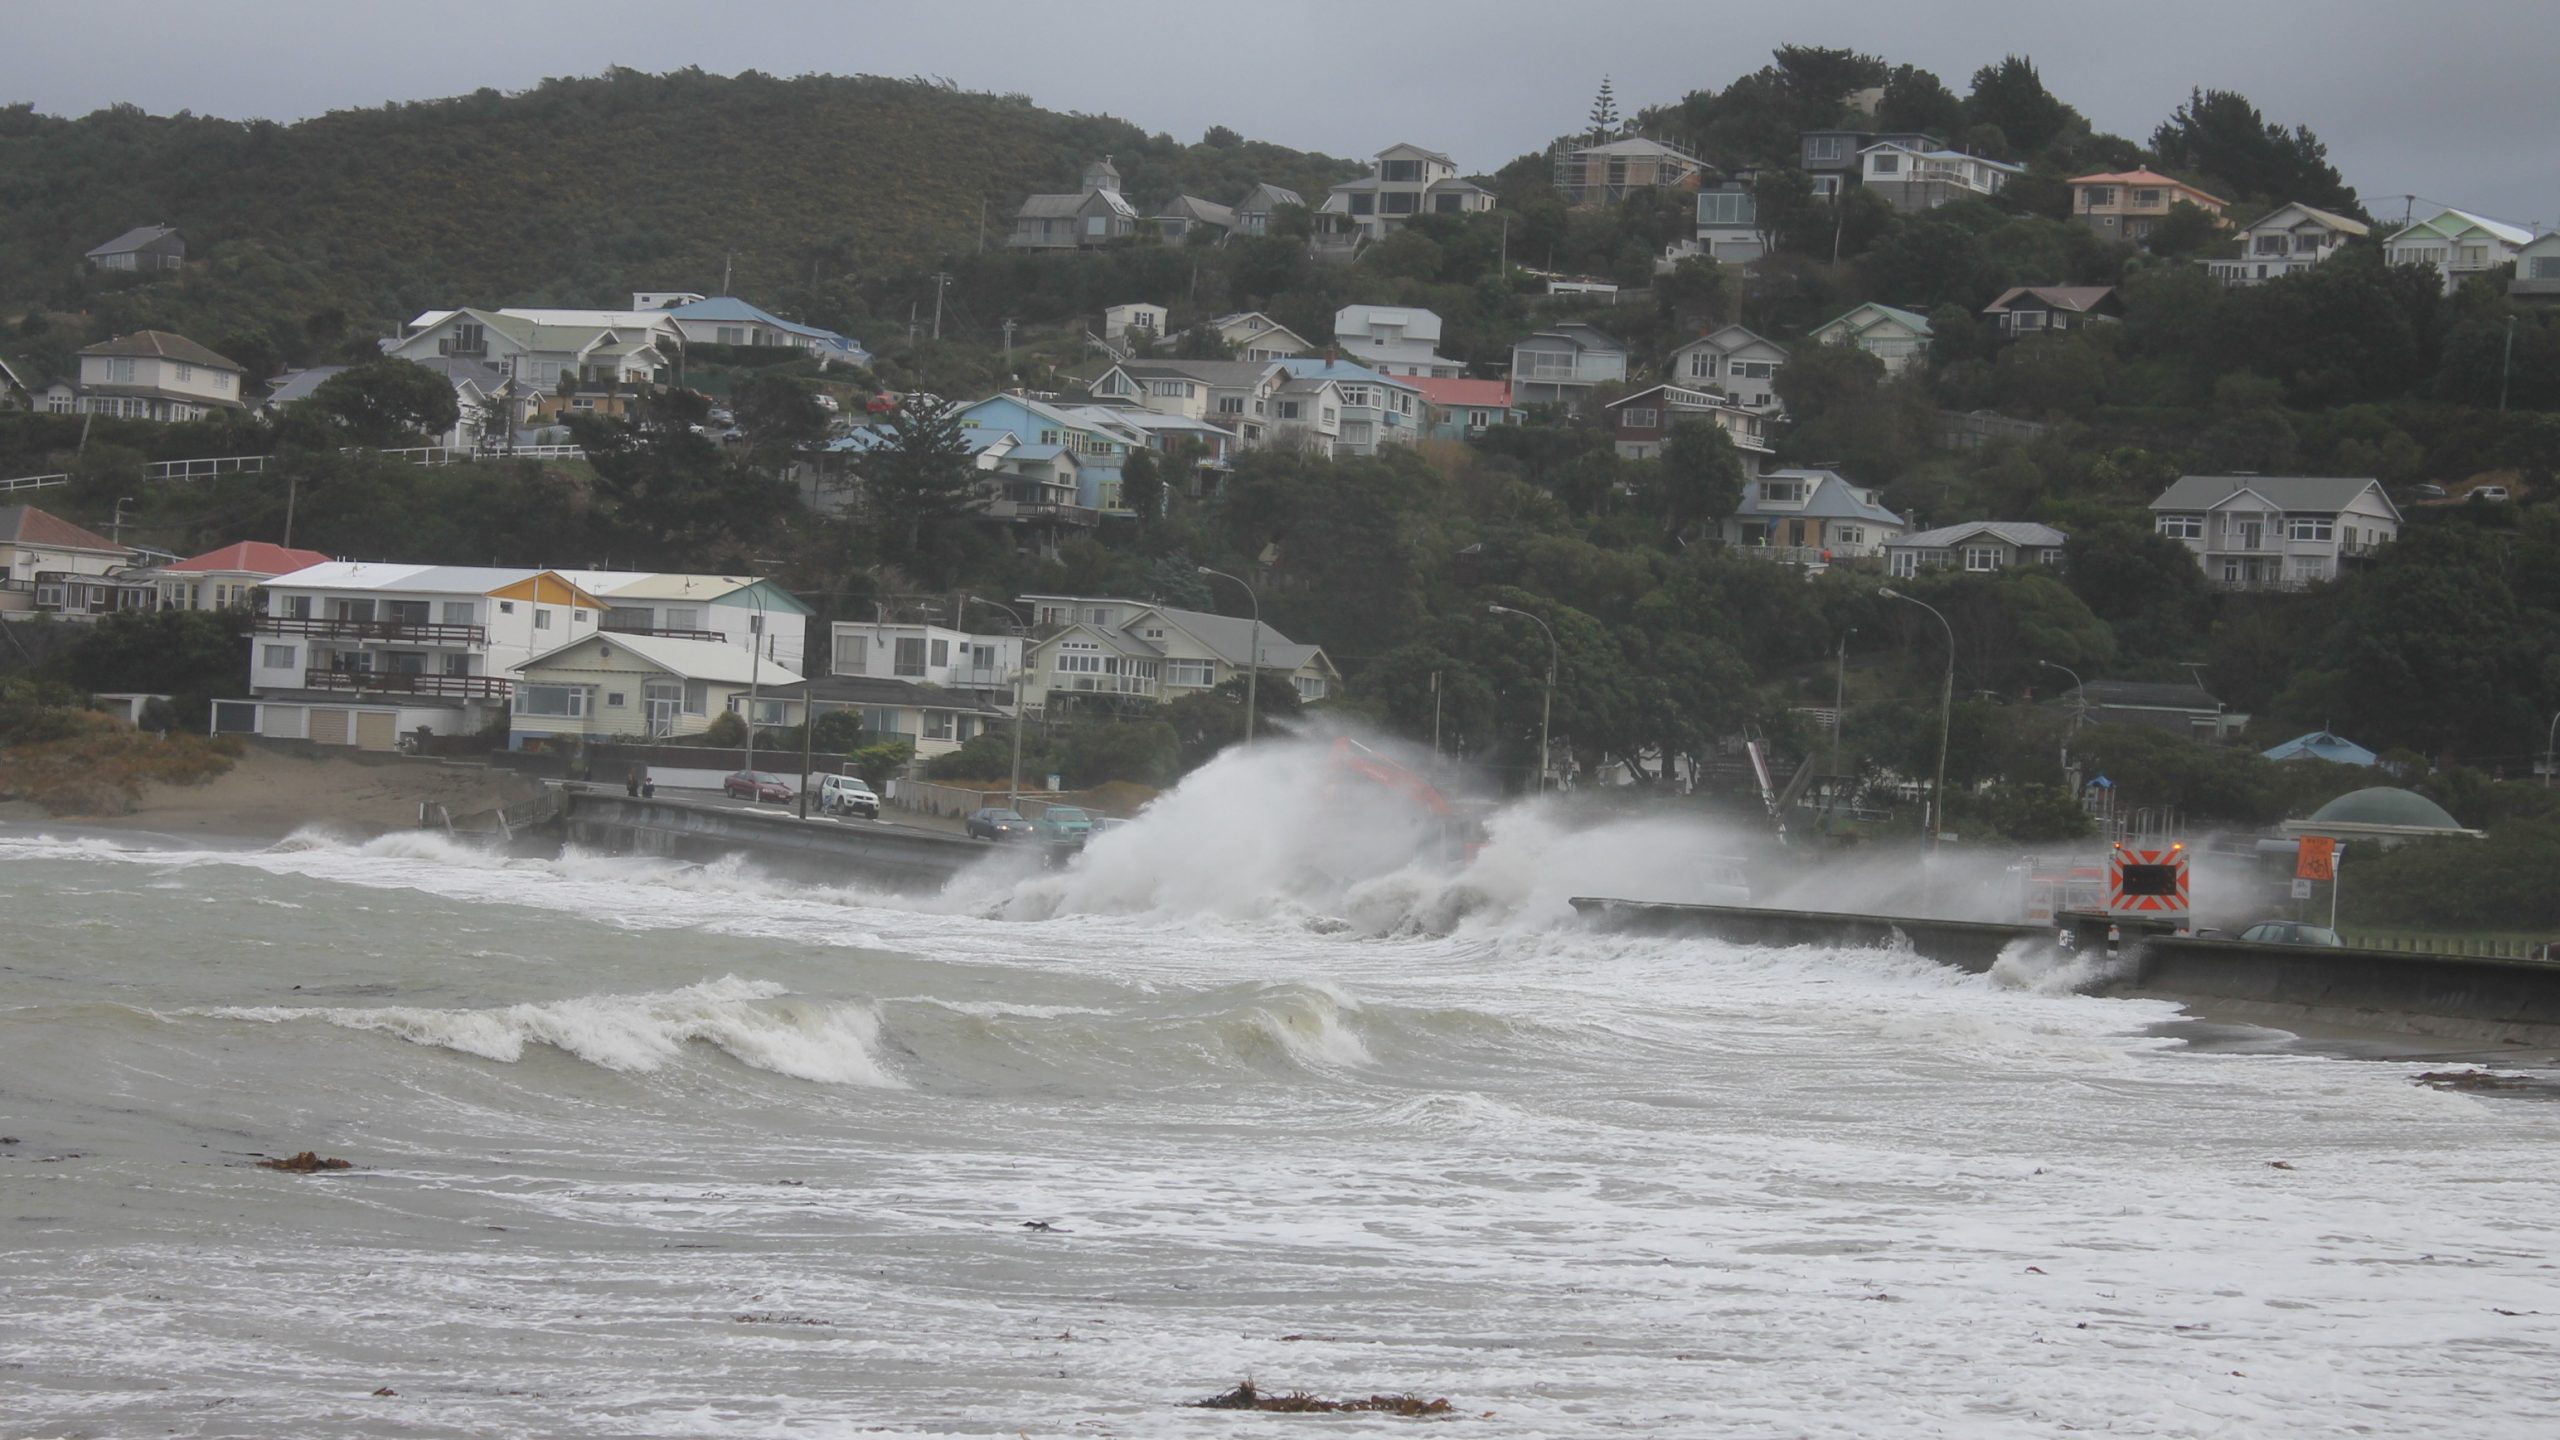 Southerly waves breaking on the Wellington south coast, 21 June 2013